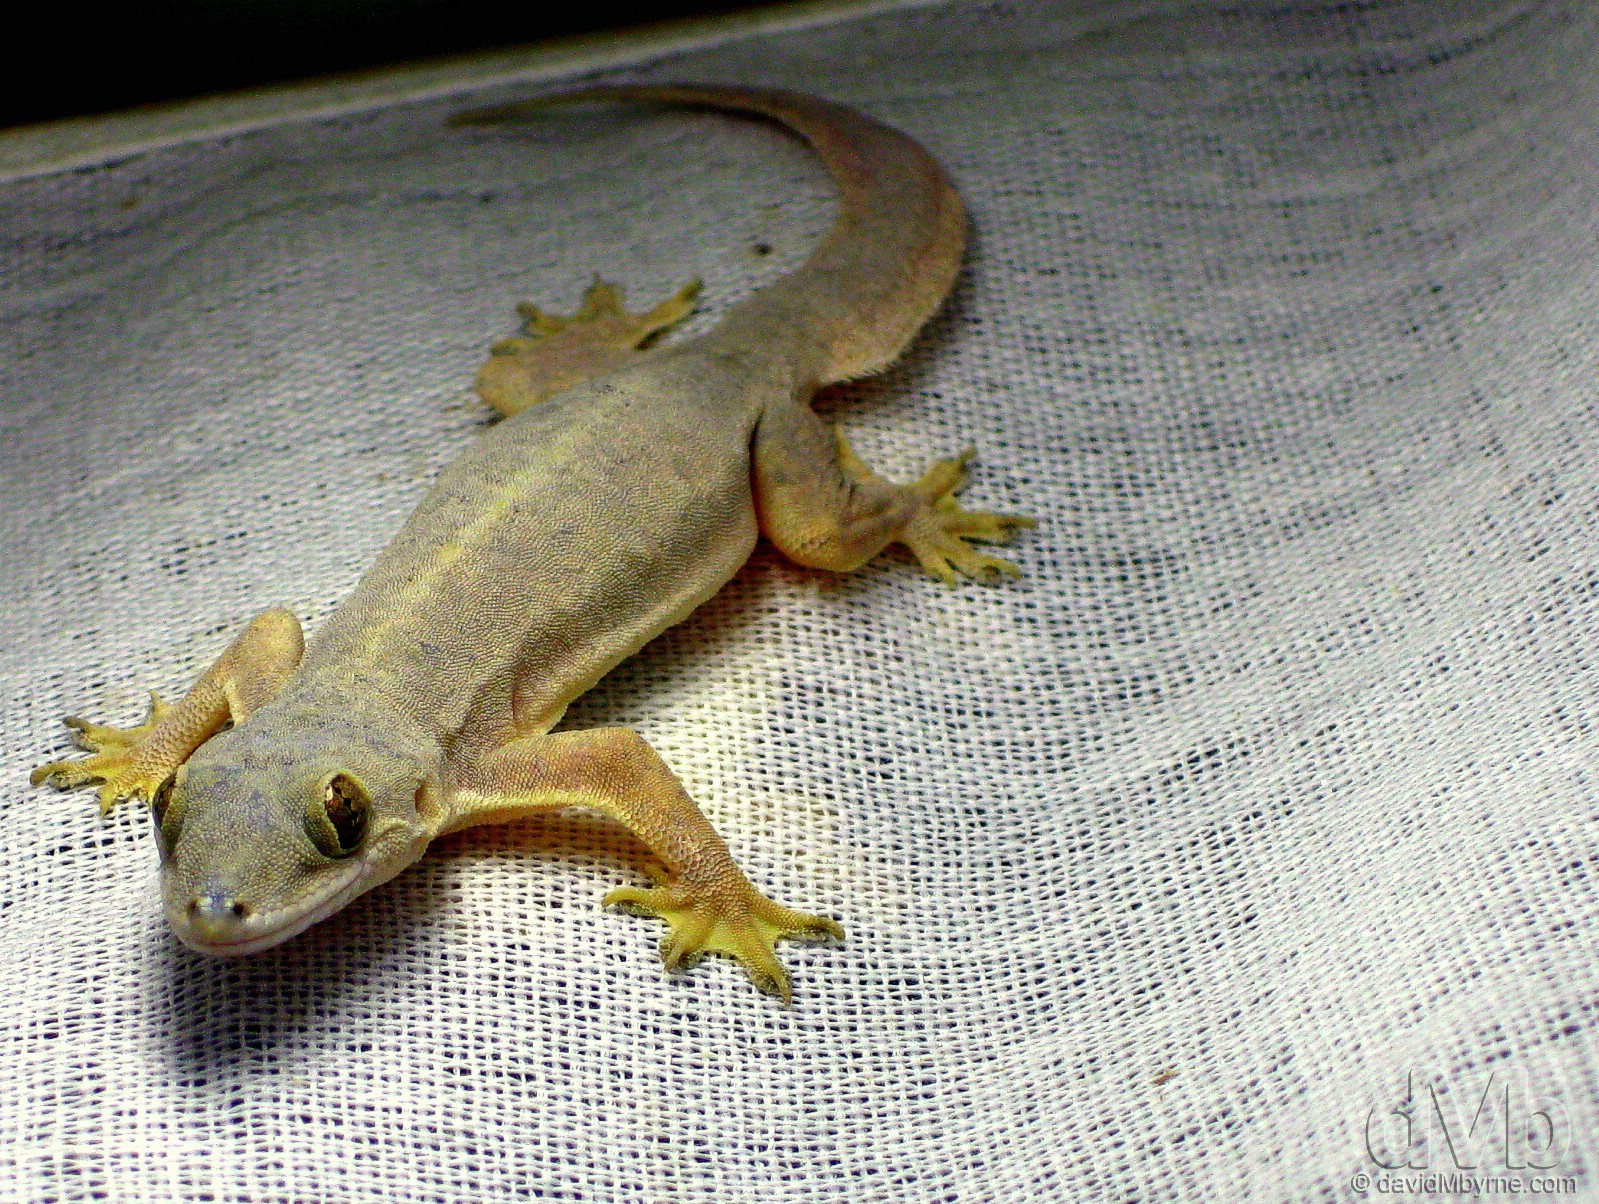 A tiny gecko on the inside of a lampshade on the resort island of Boracay, the Philippines. September 24th, 2011 (Canon IXUS 80IS)